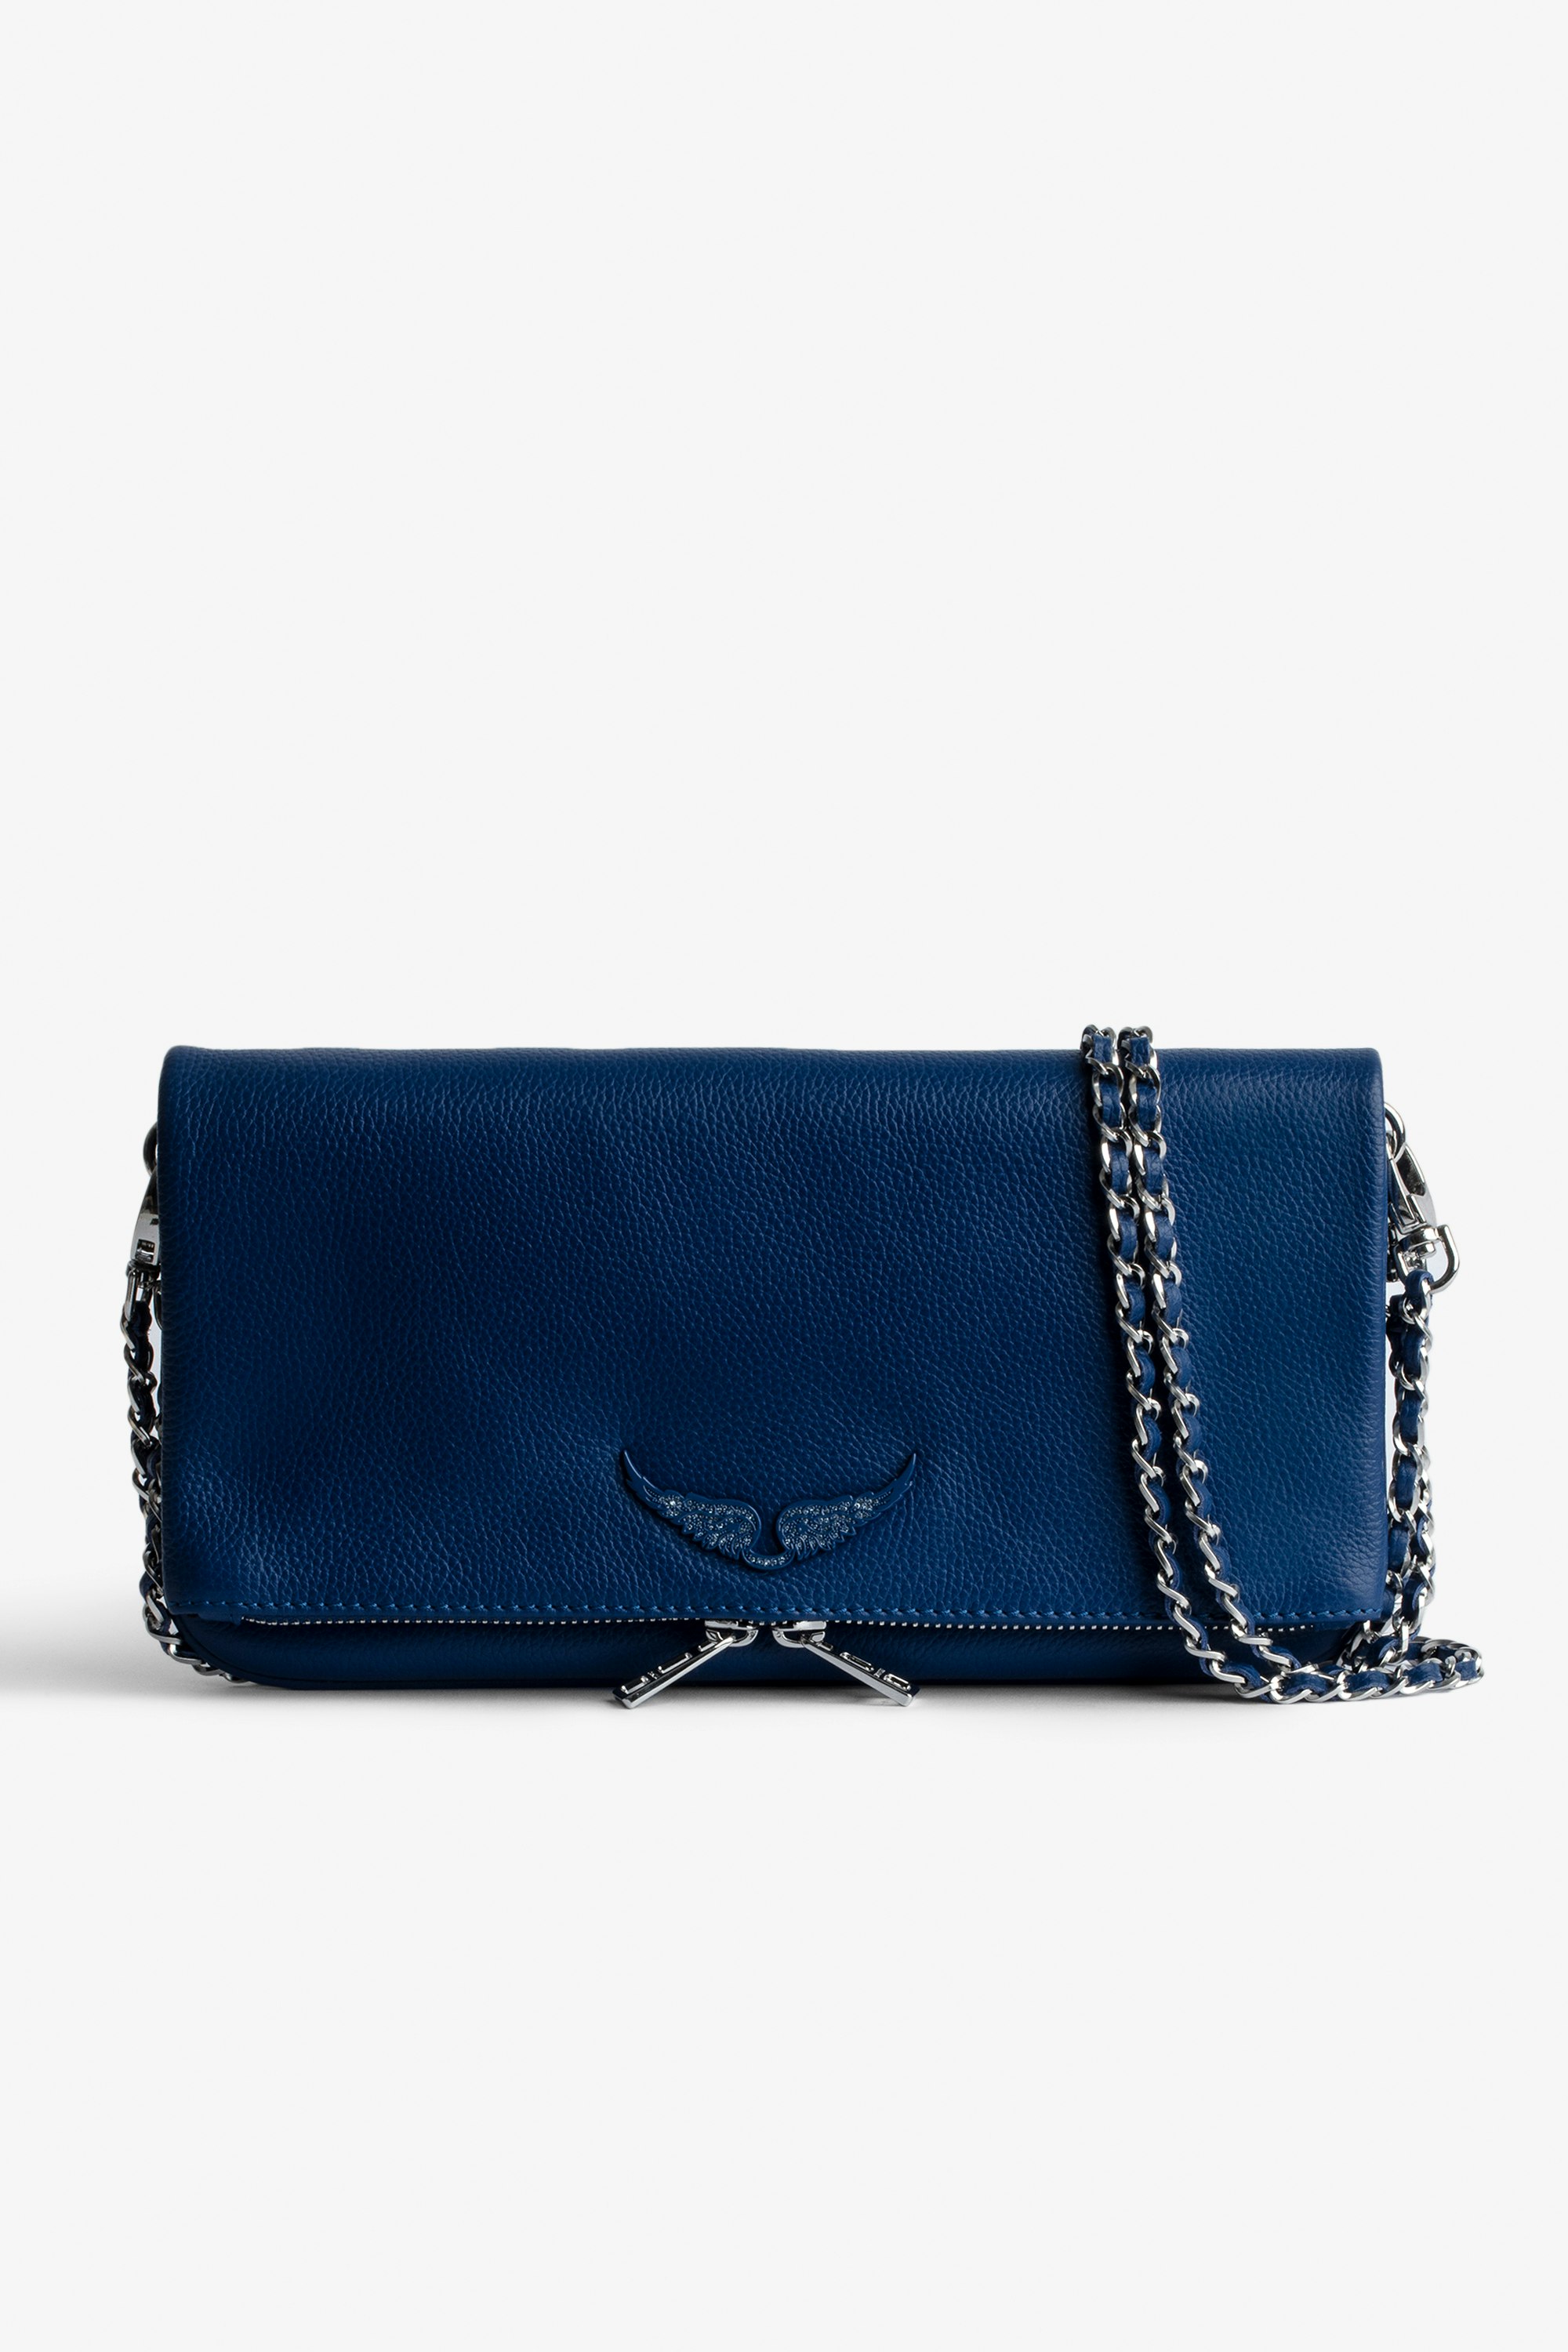 Rock Clutch Women's clutch bag in blue grained leather with double leather-and-metal chain